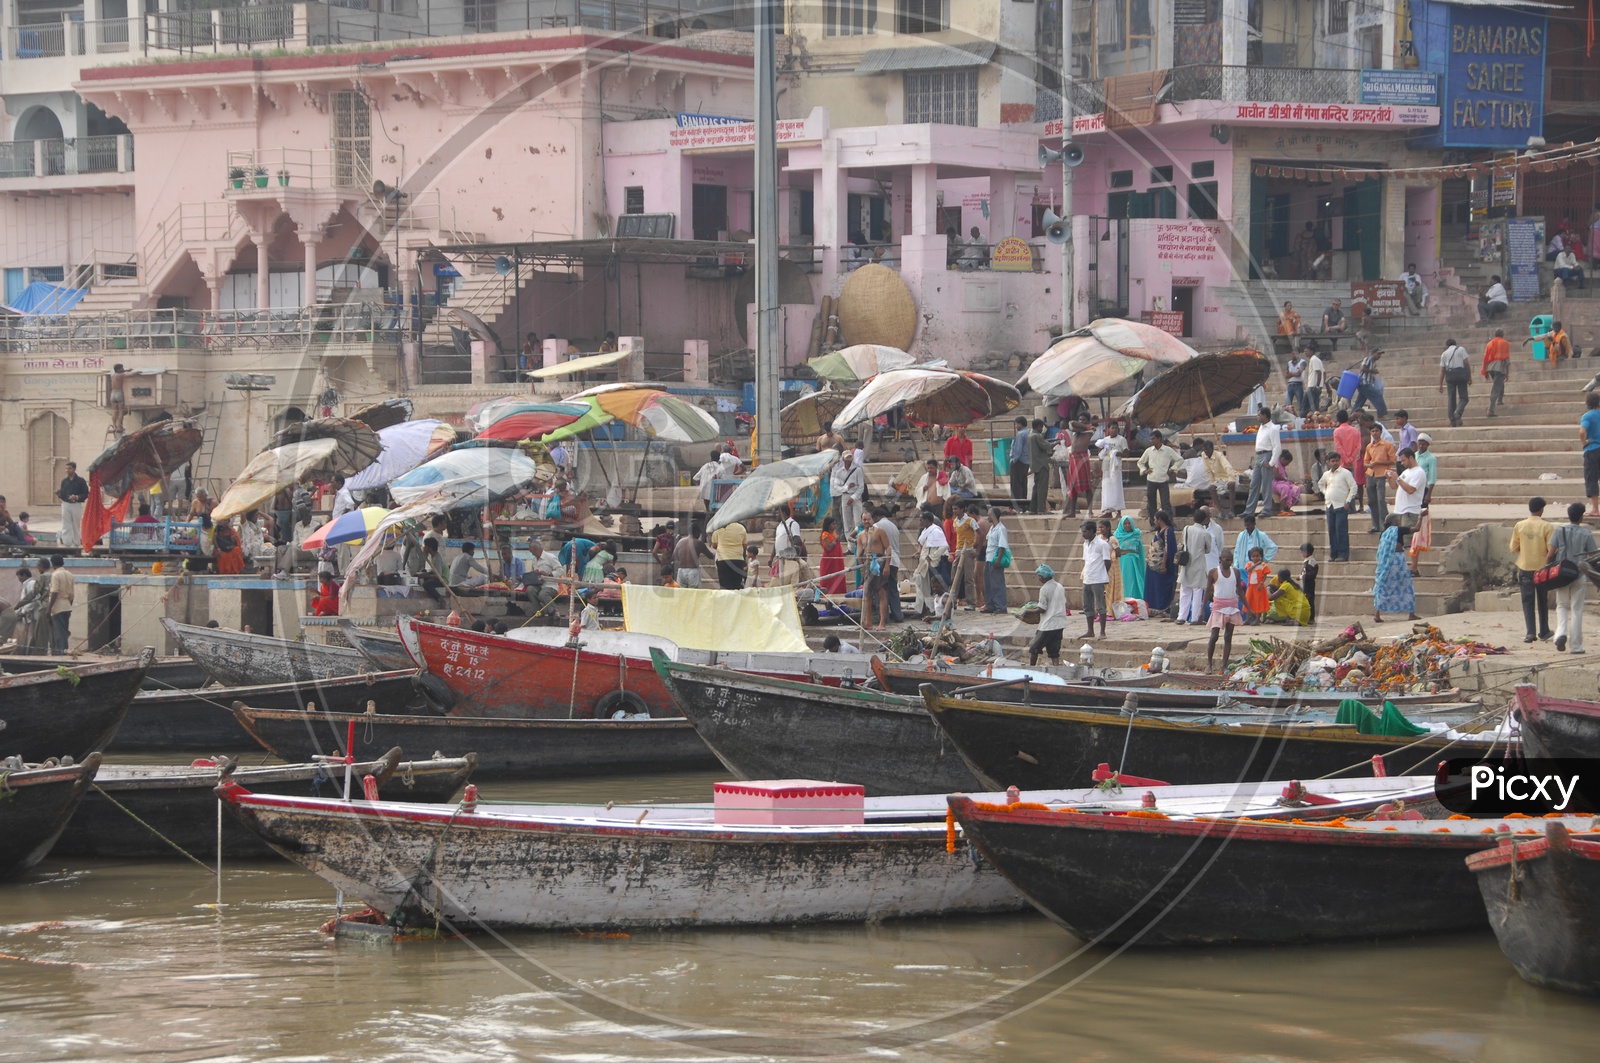 Boats and tourists in the river along the varanasi Ghats